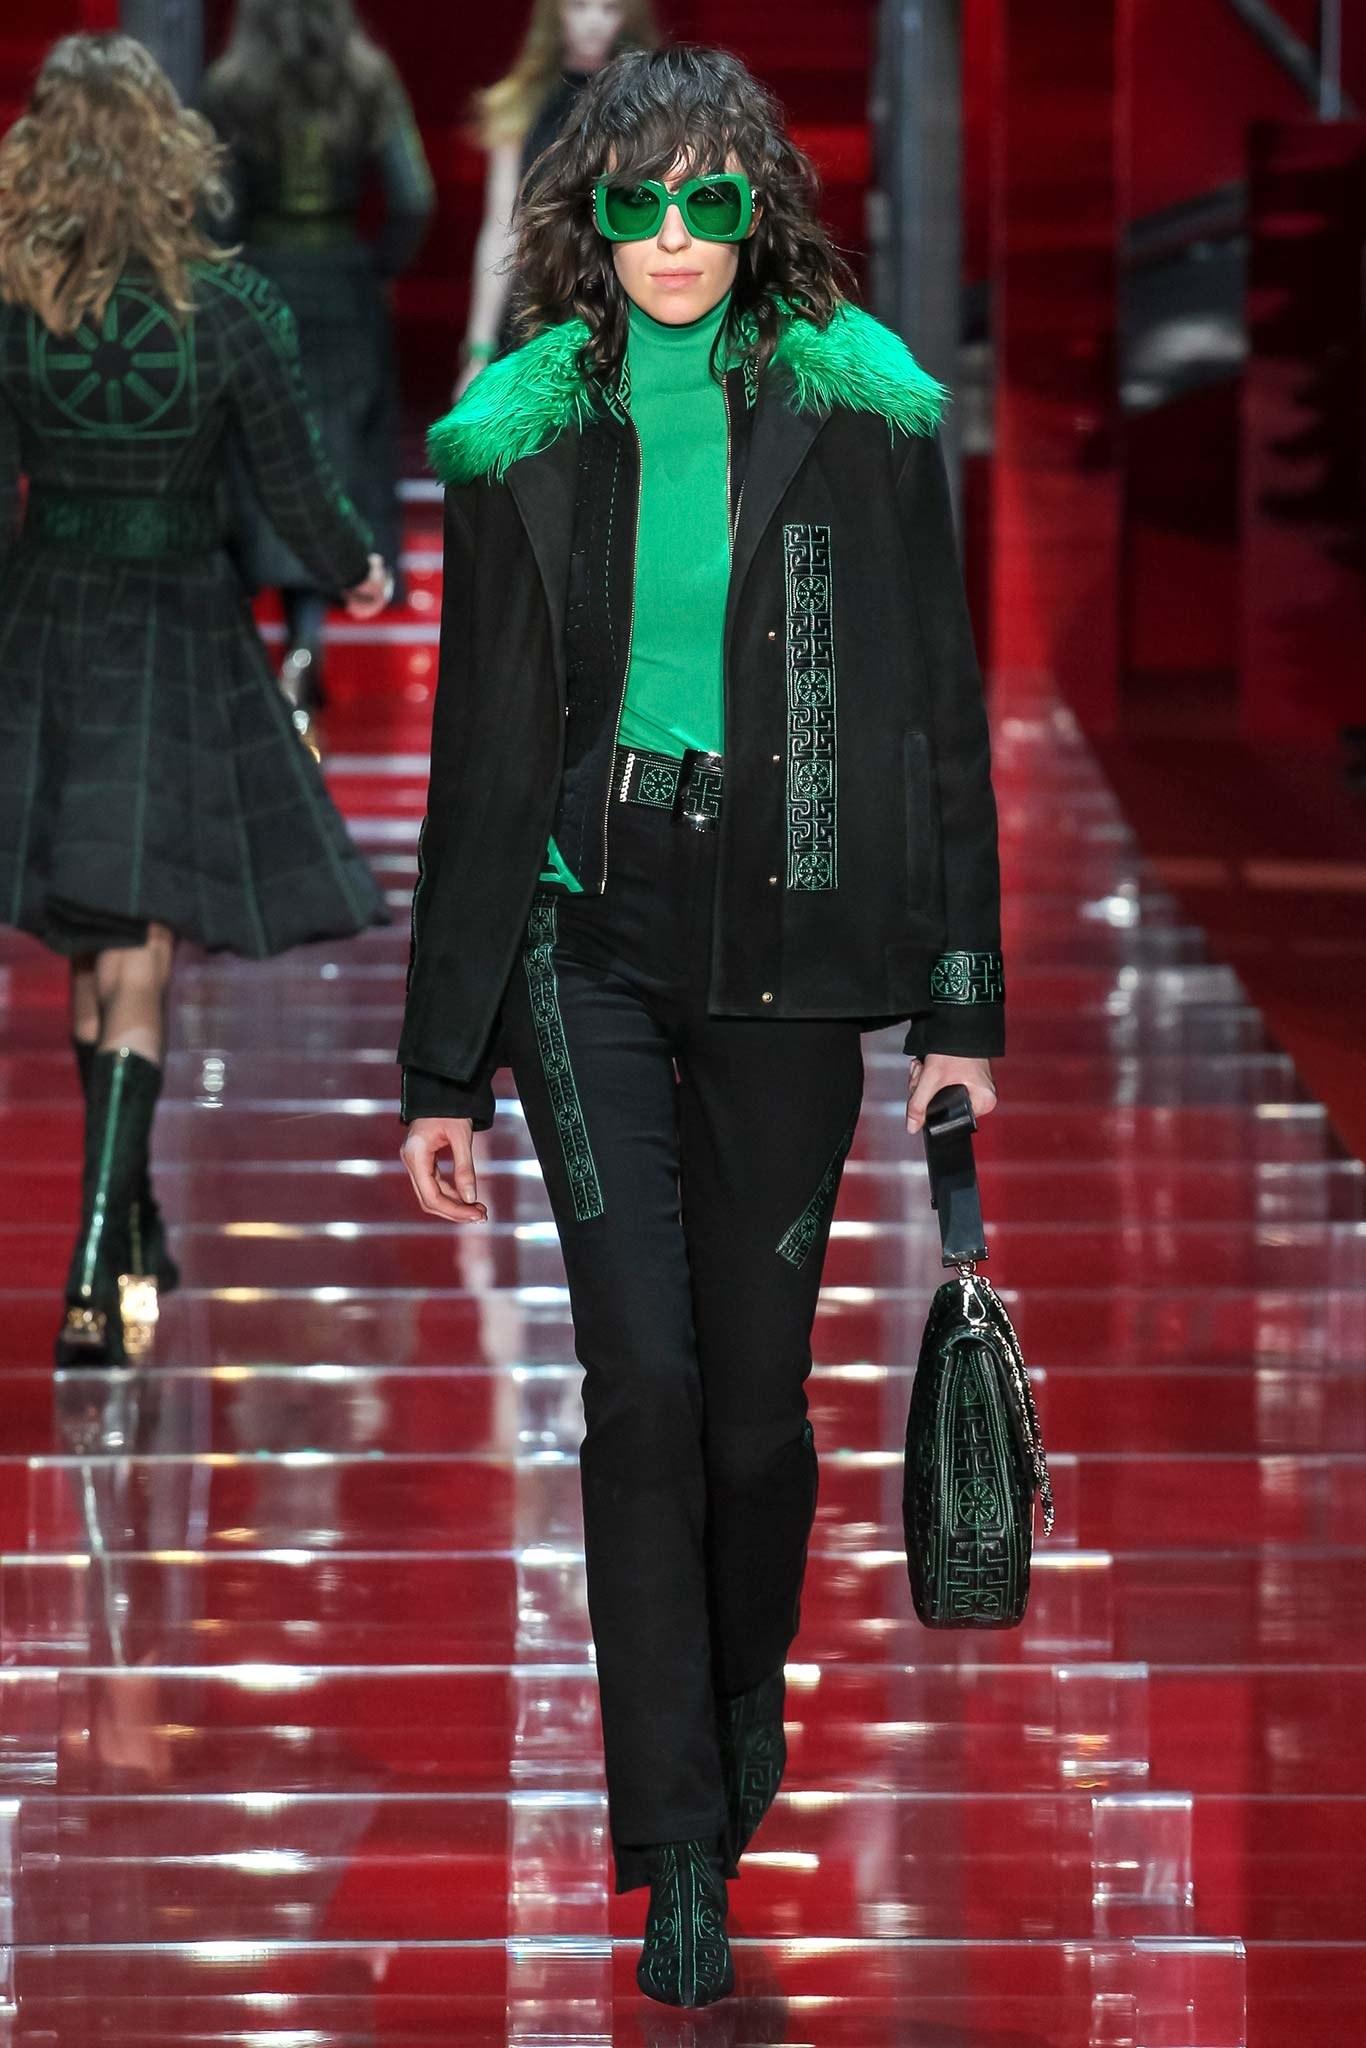 VERSACE

Actual runway Sample Fall/Winter 2015 Look # 17

Black Suede belt with Green Stiches

Gold tone Buckle


Made in Italy

Size 70/28

33 1/2